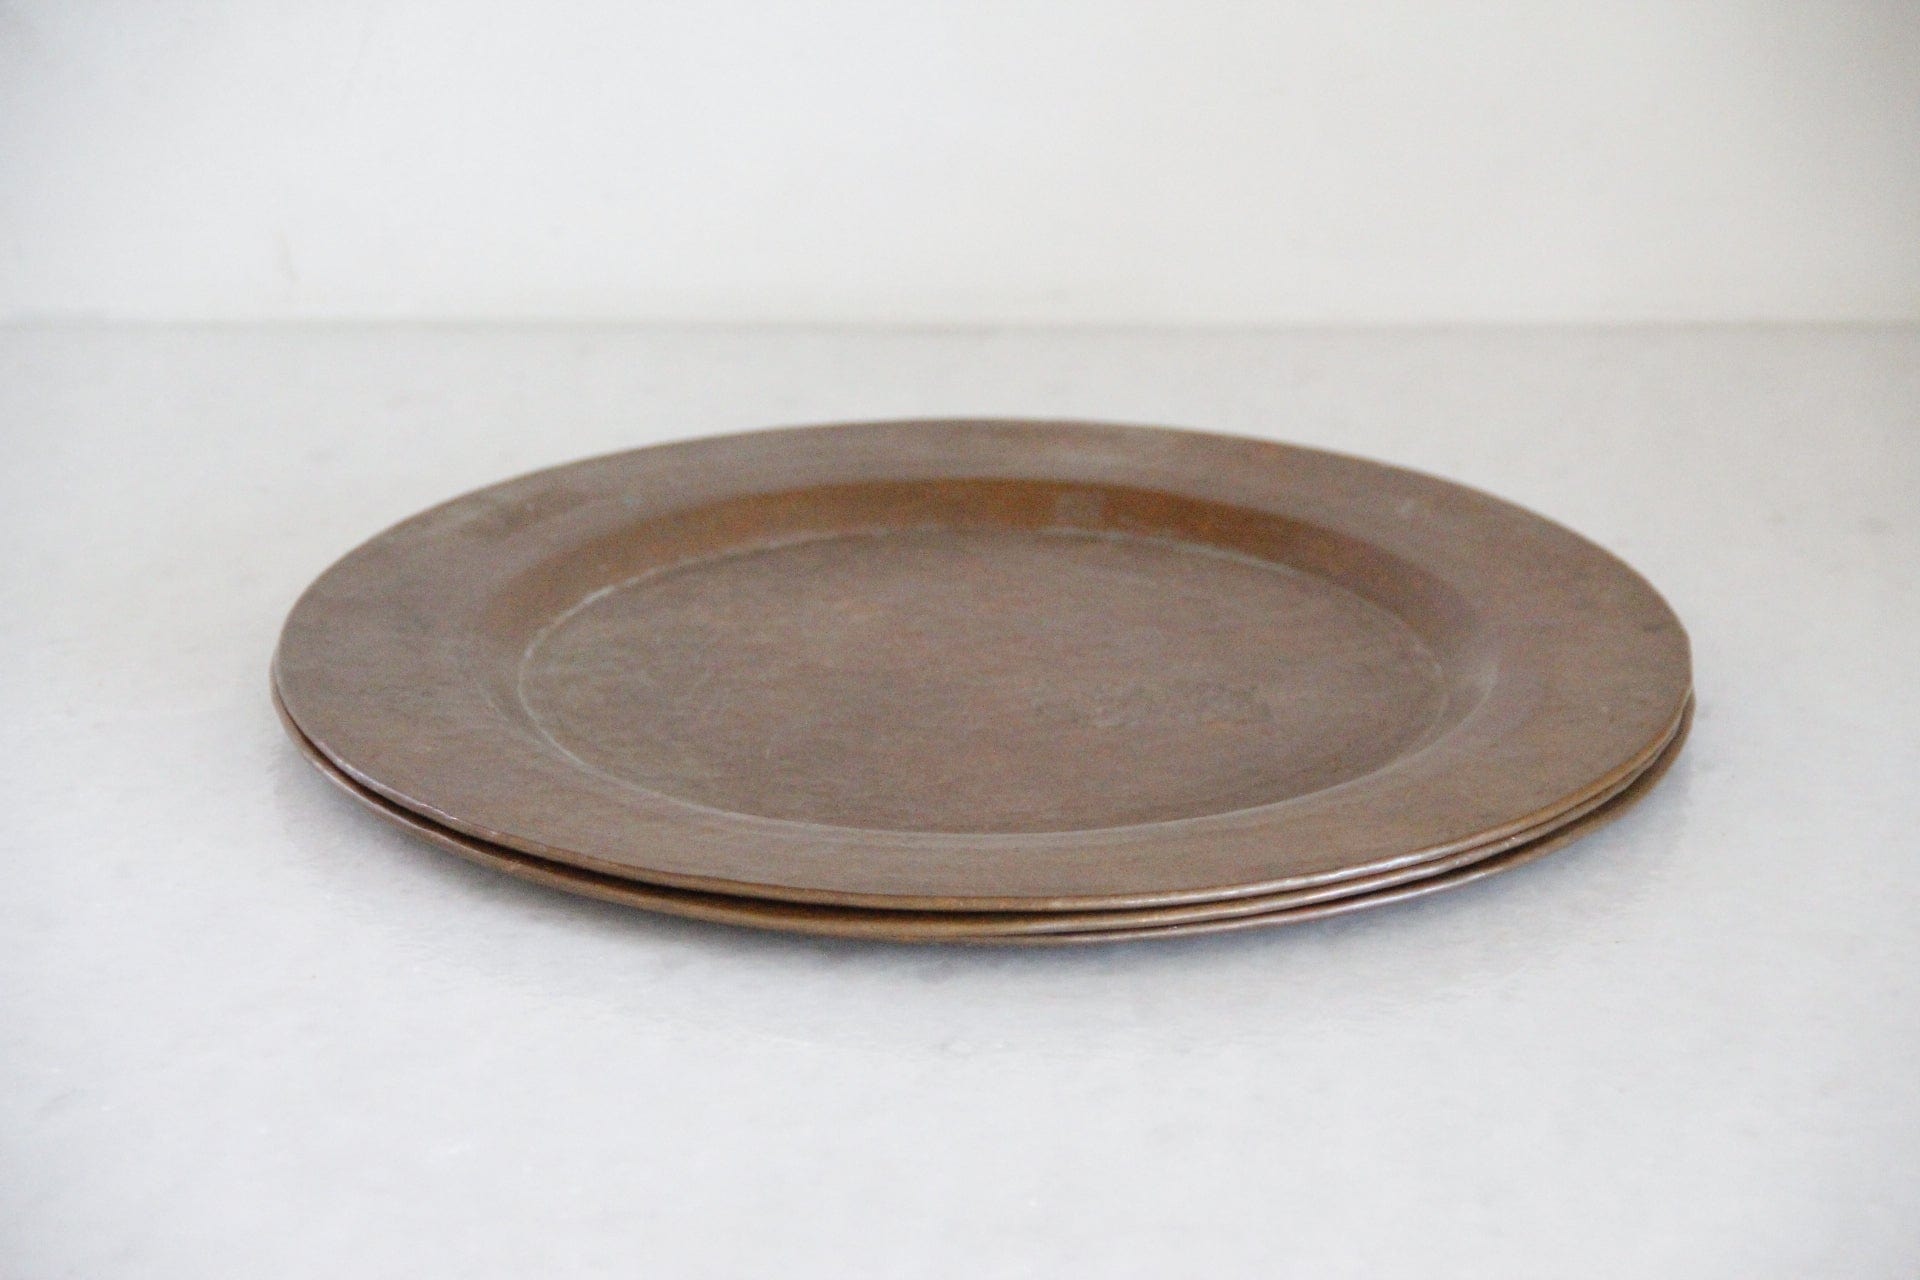 Hammered Copper Charger Plates | 3 Pcs. - Debra Hall Lifestyle